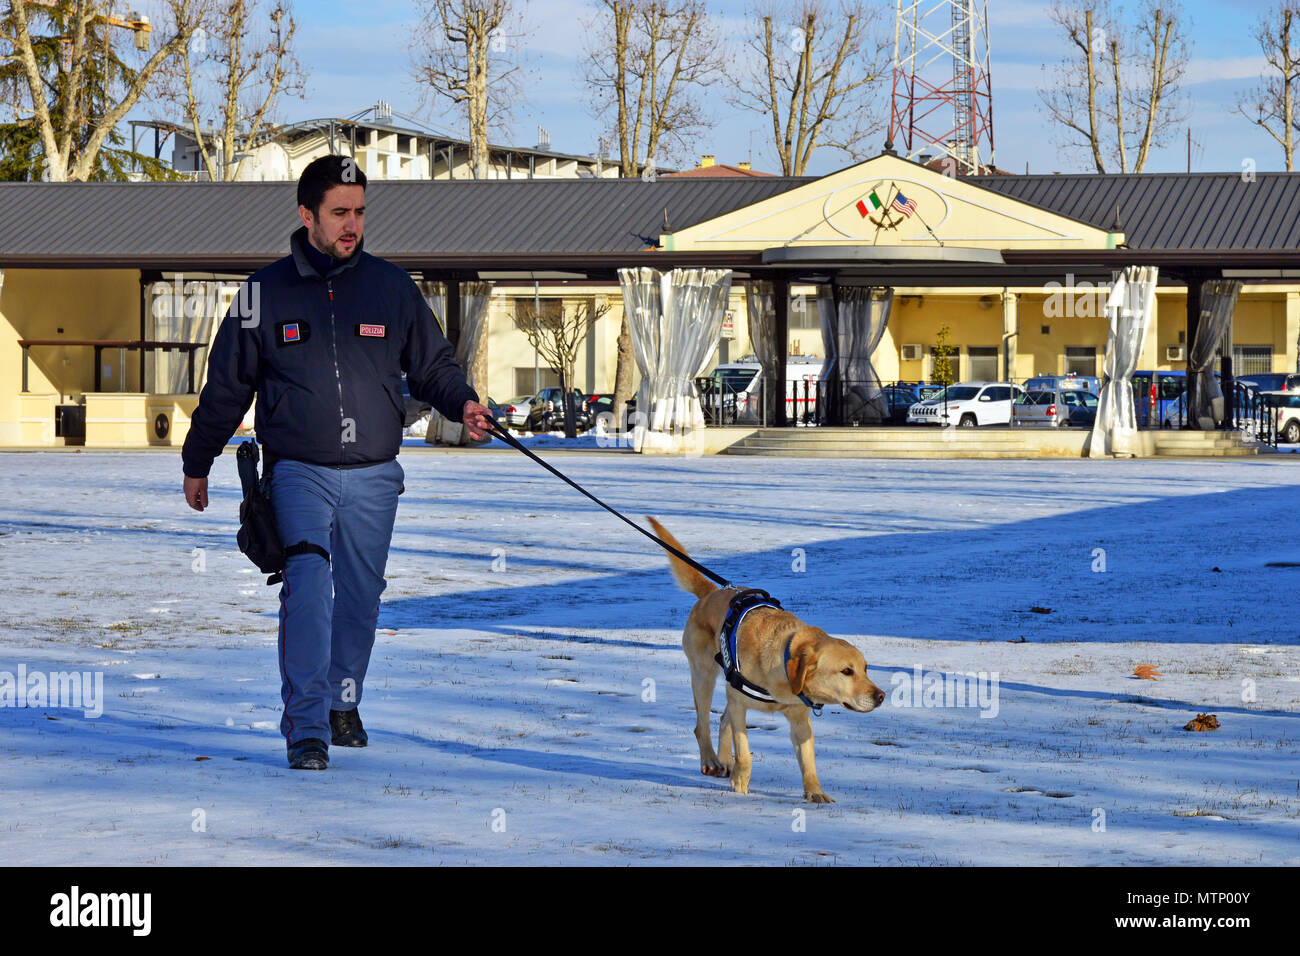 Italian military working dog Thunder and his handler Deputy Inspector Filippo Nicola, assigned to the Italian Police Squadra Cinofili K9 airport Venice, prepare to inspect areas that may have explosive residue at Caserma Ederle, Vicenza, Italy Jan. 17, 2017. Military Working Dog teams are used in patrol, drug and explosive detection and specialized mission functions for the Department of Defense and other government agencies. The 525th Military Working Dog Detachment, joint training with Italian Police Squadra Cinofili K9 airport Venice and Questura di Padova and U.S. Air Force. (U.S. Army pho Stock Photo